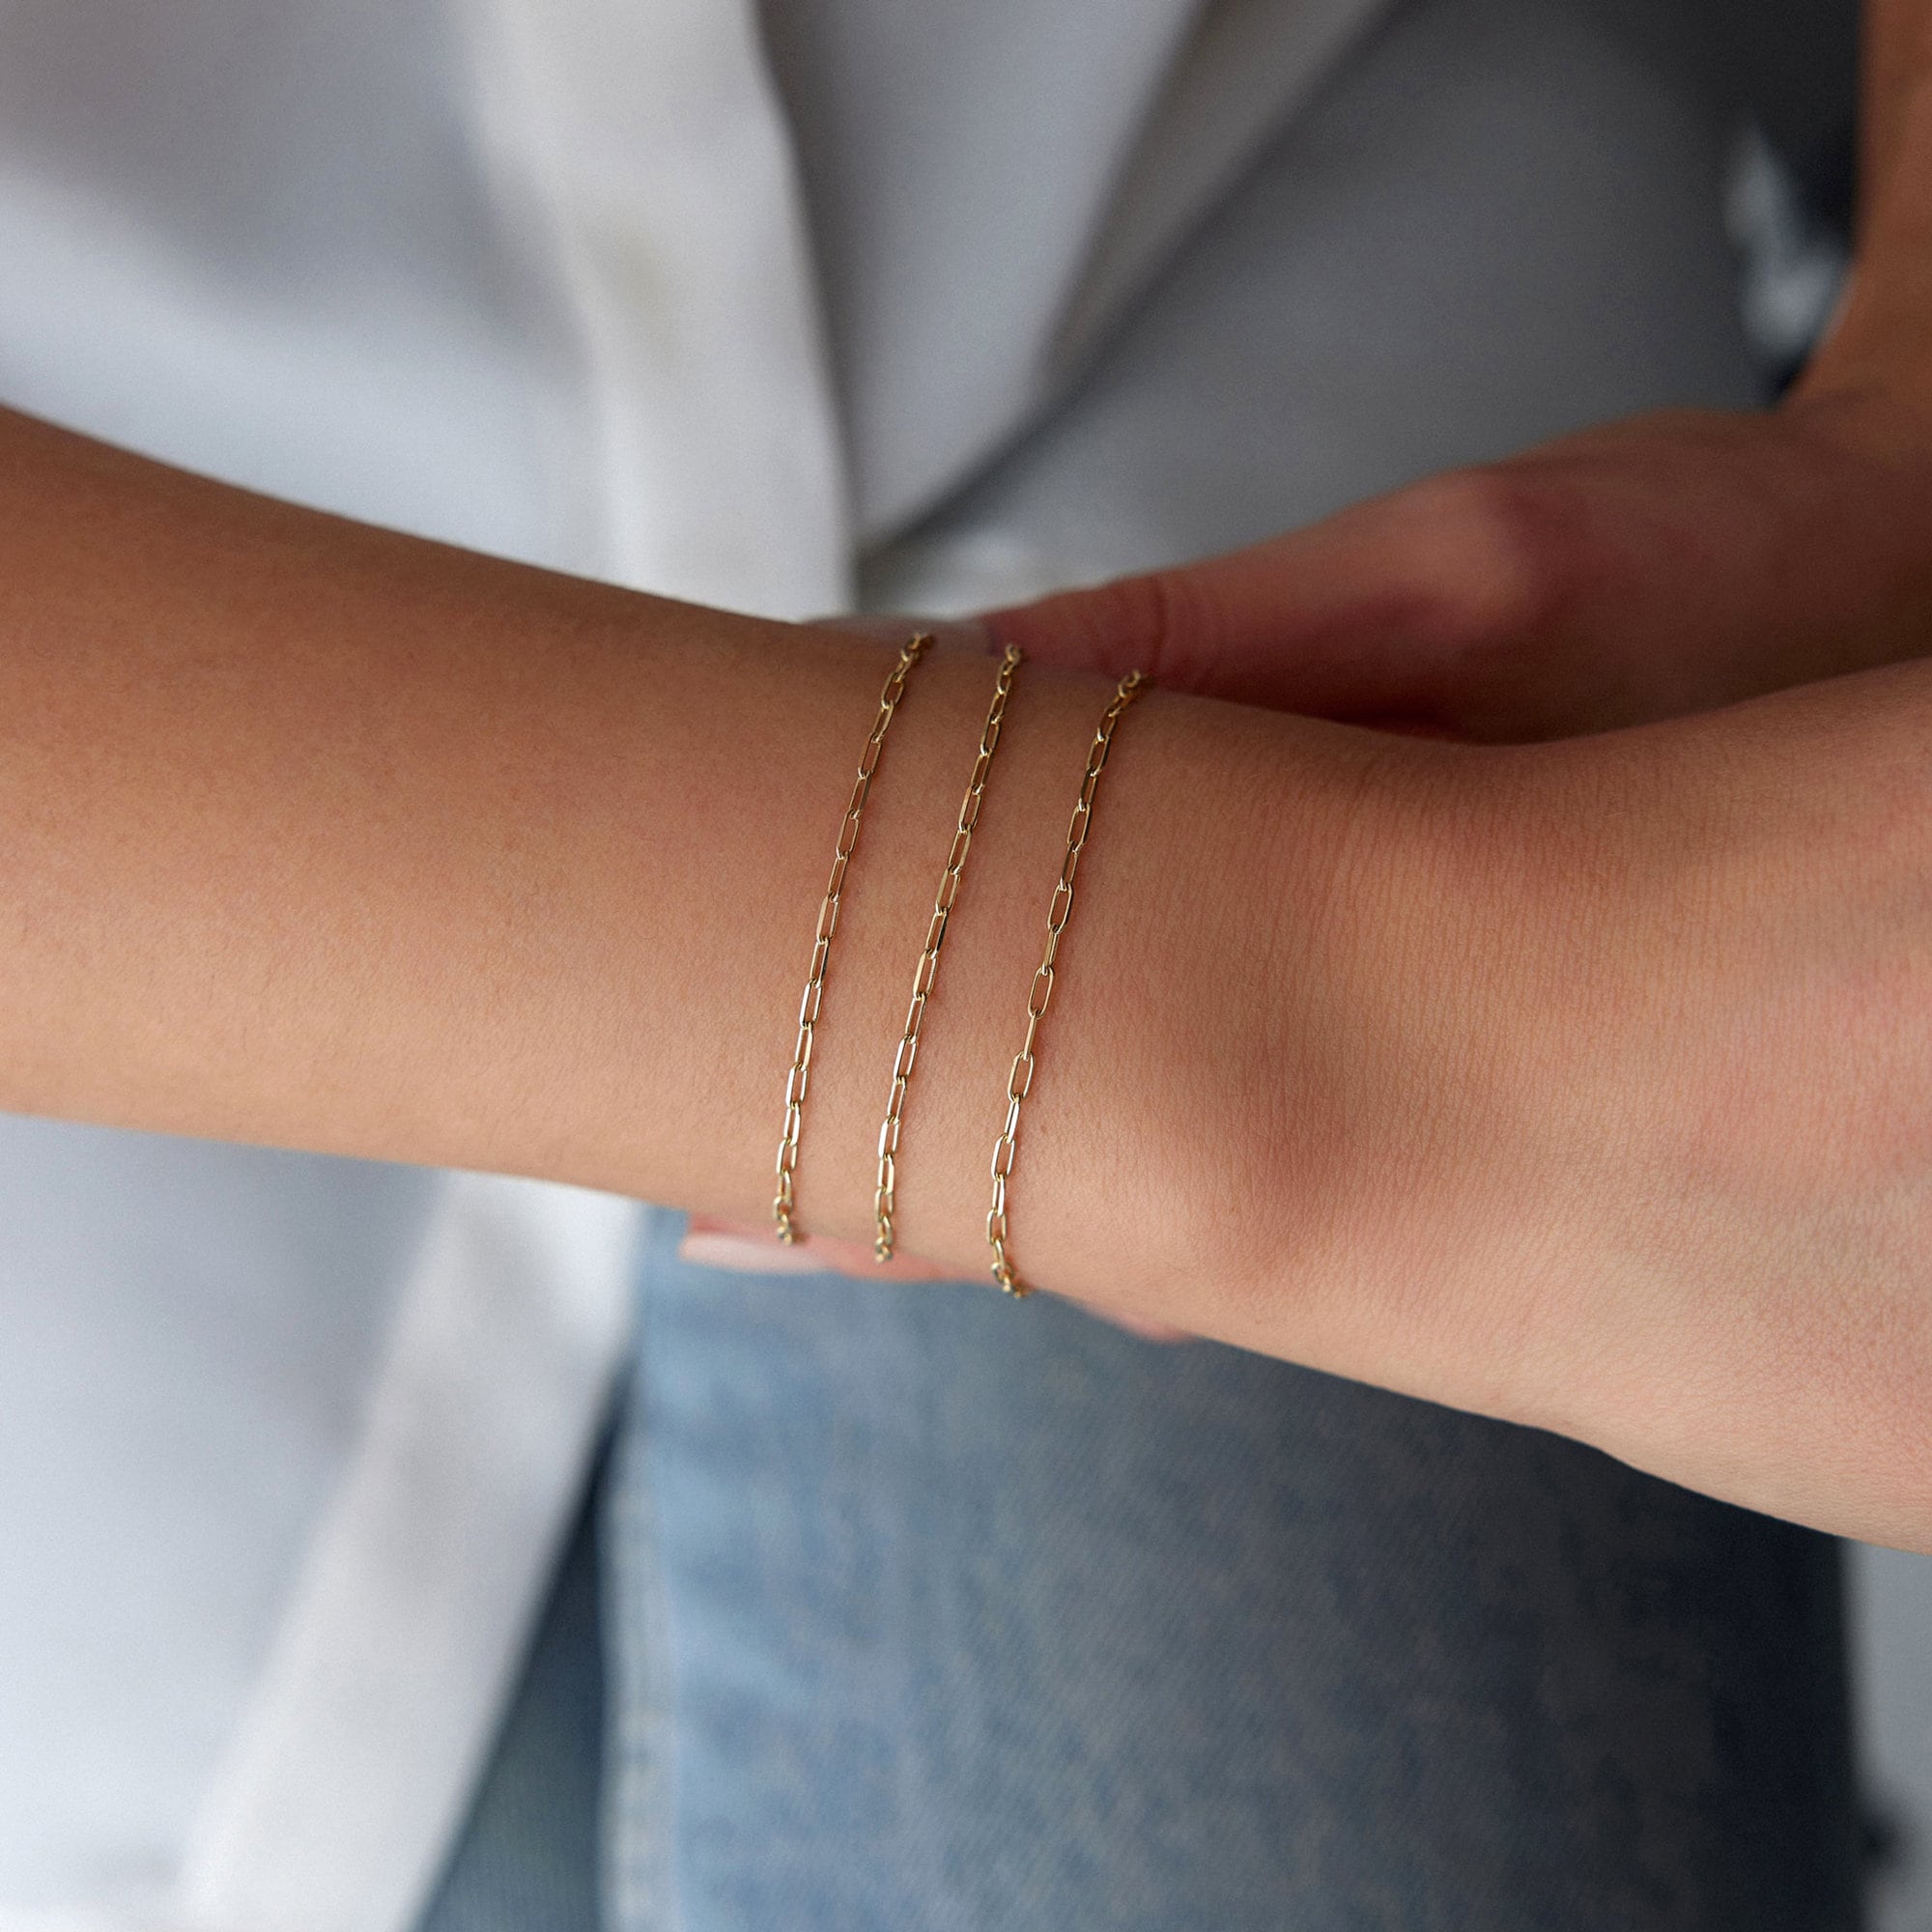 Thin Paperclip Chain Bracelet in 14K Gold